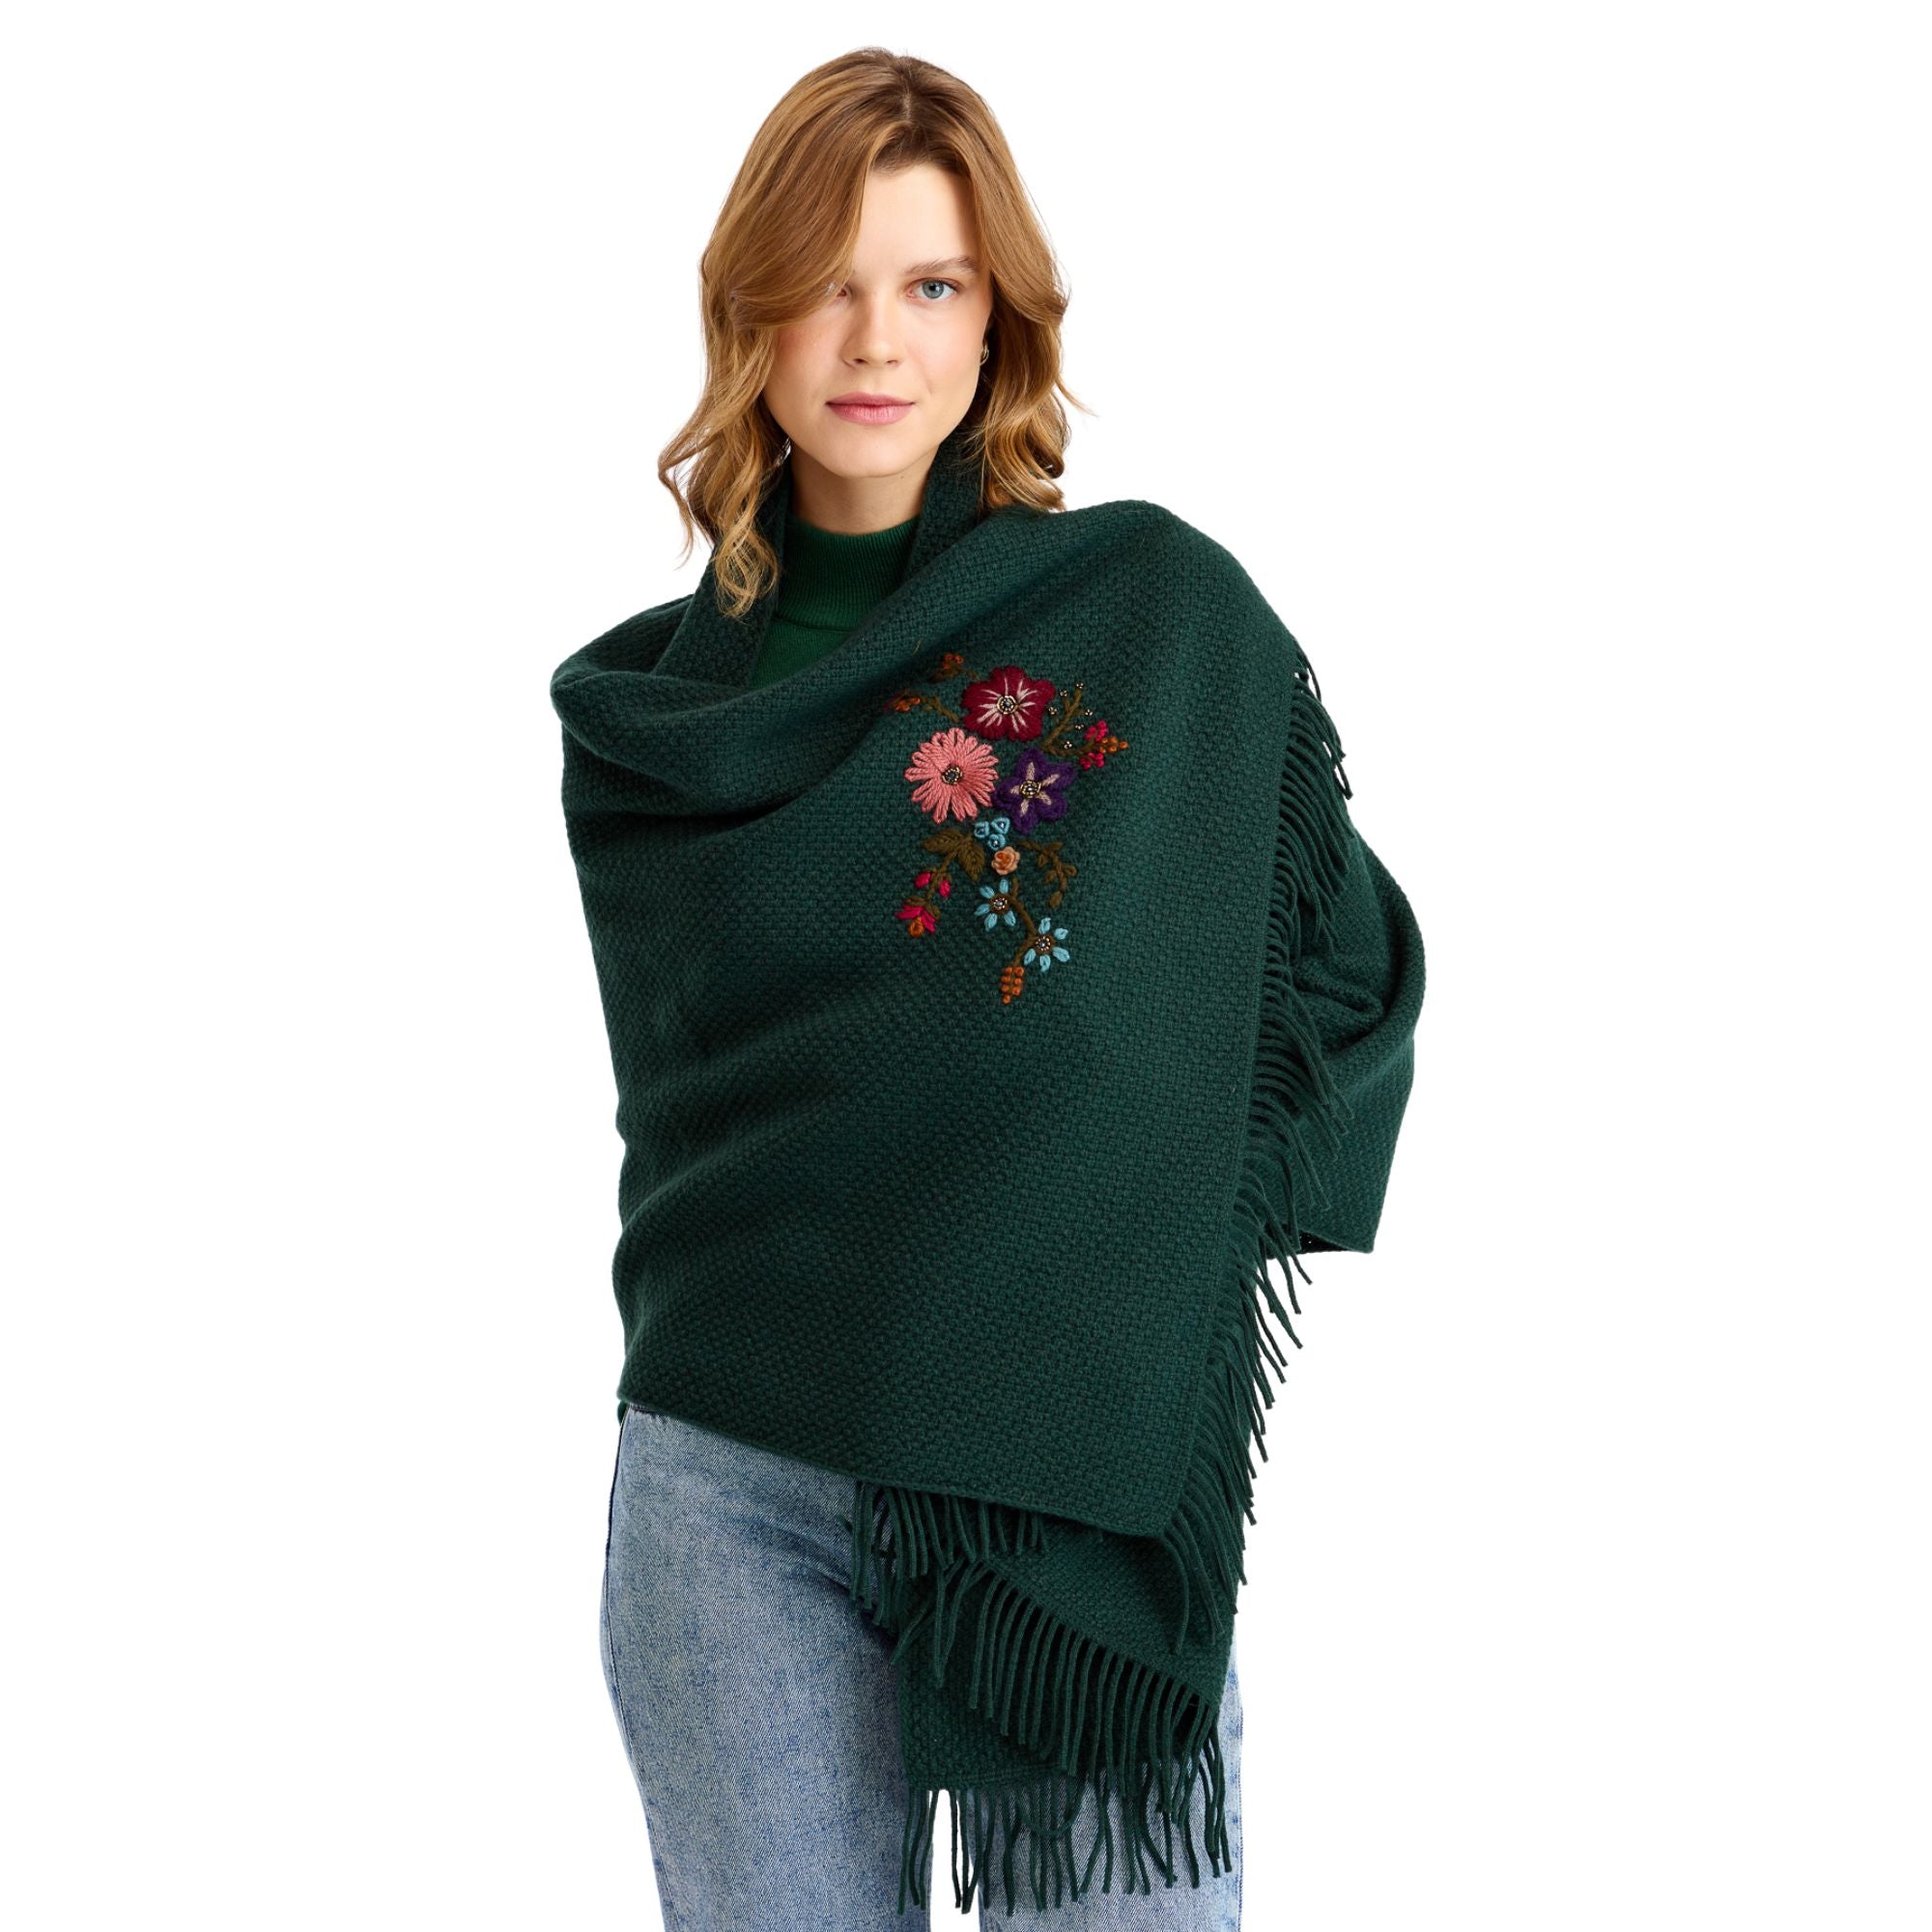 Women's Knitted Brass Embroidered Wool Shawl - 62x162 cm